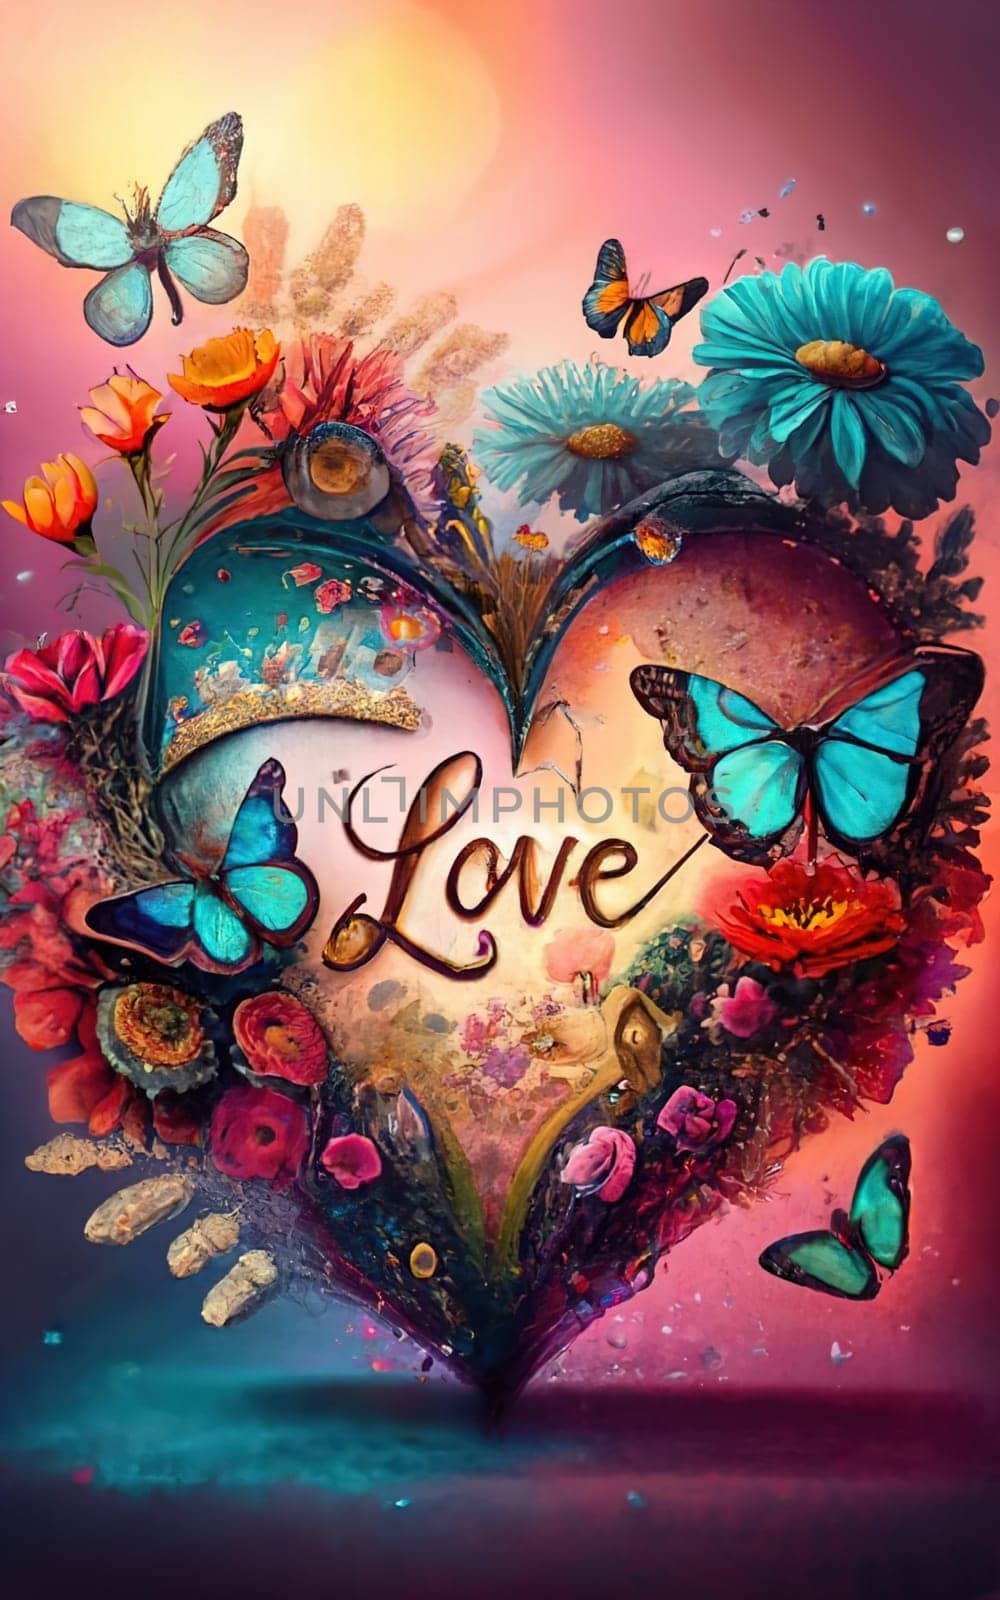 Romantic Watercolor Love Heart with Flowers, Butterflies, and Sunset - Soft Pastel Colors download image